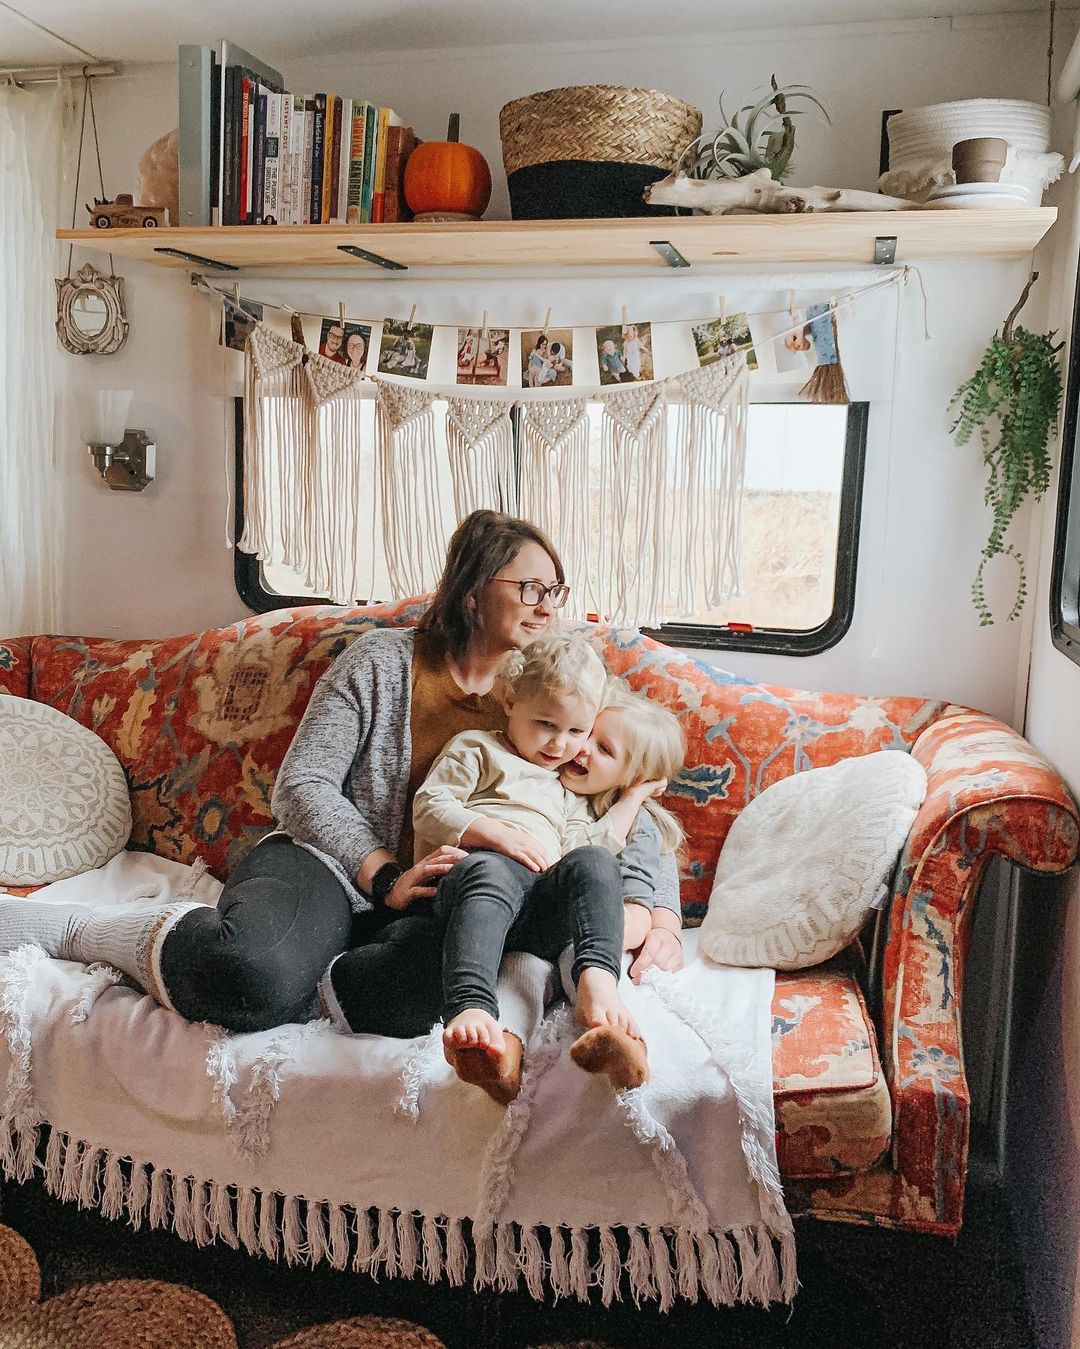 Mom Sitting with Two Kids in an RV. Photo by Instagram user @homestead.on.wheels